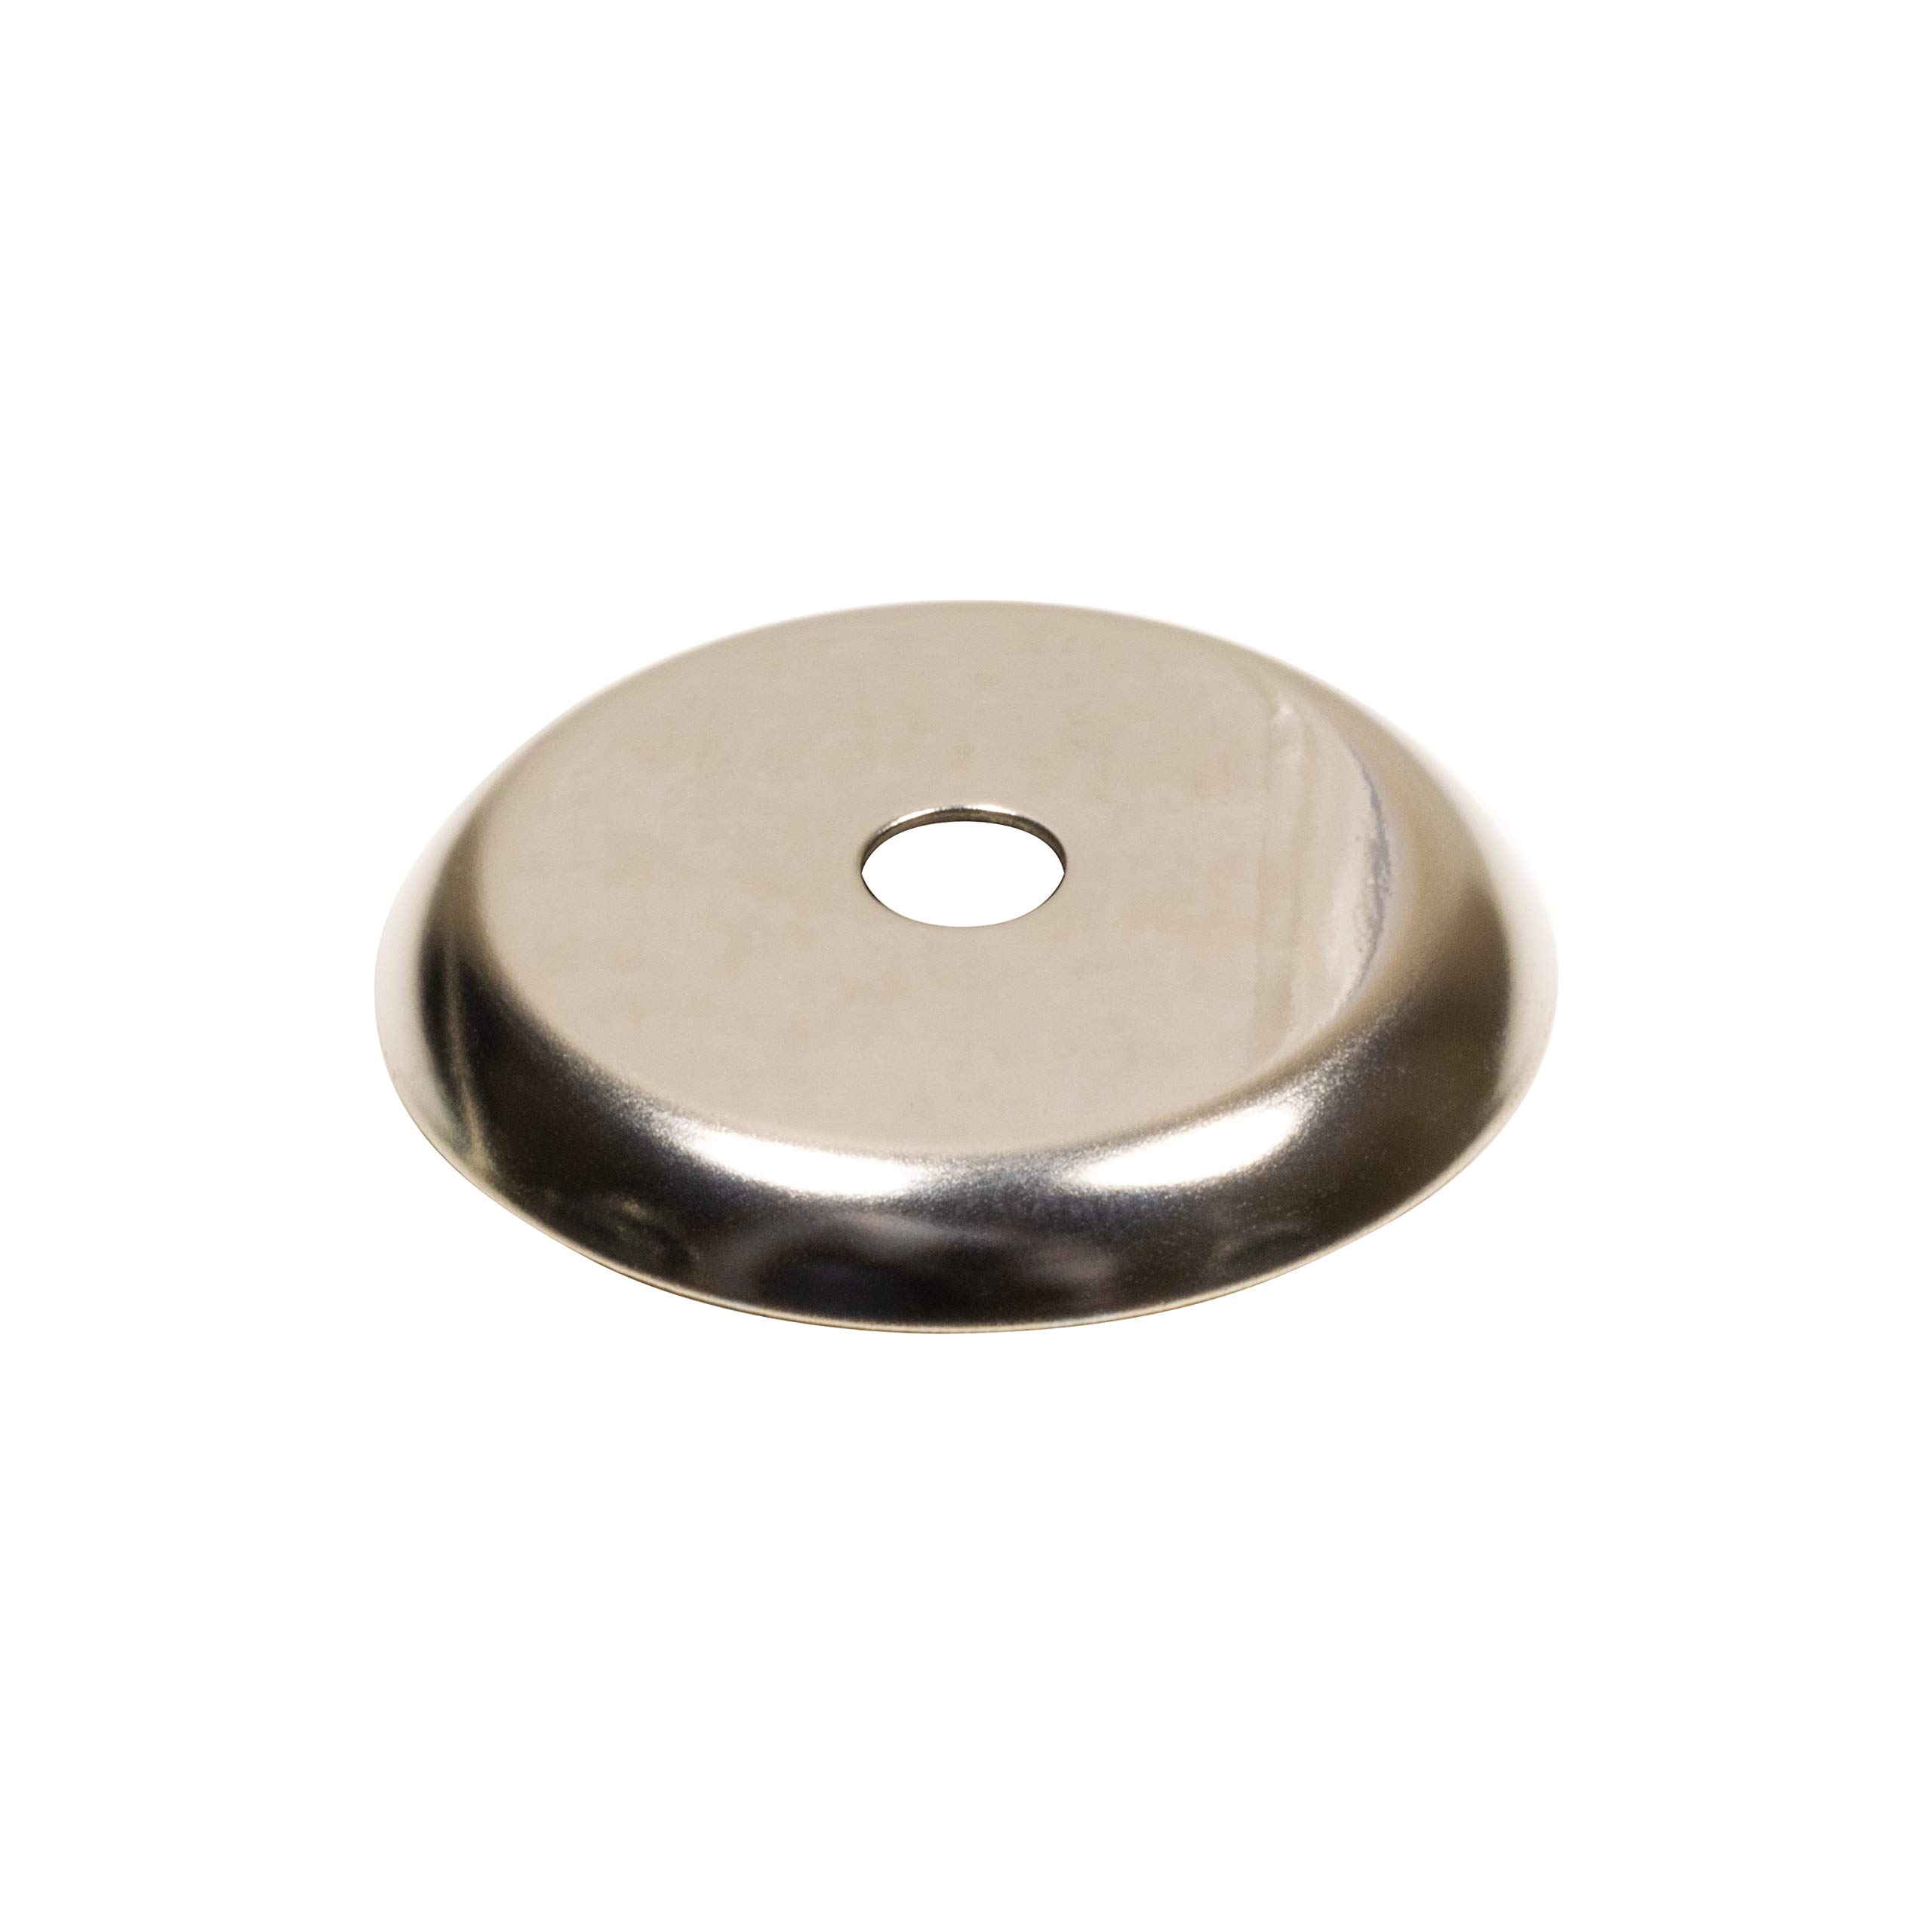 Univen Blender Square Drive Pin Stud and Slinger fits Oster and Osterizer Blenders